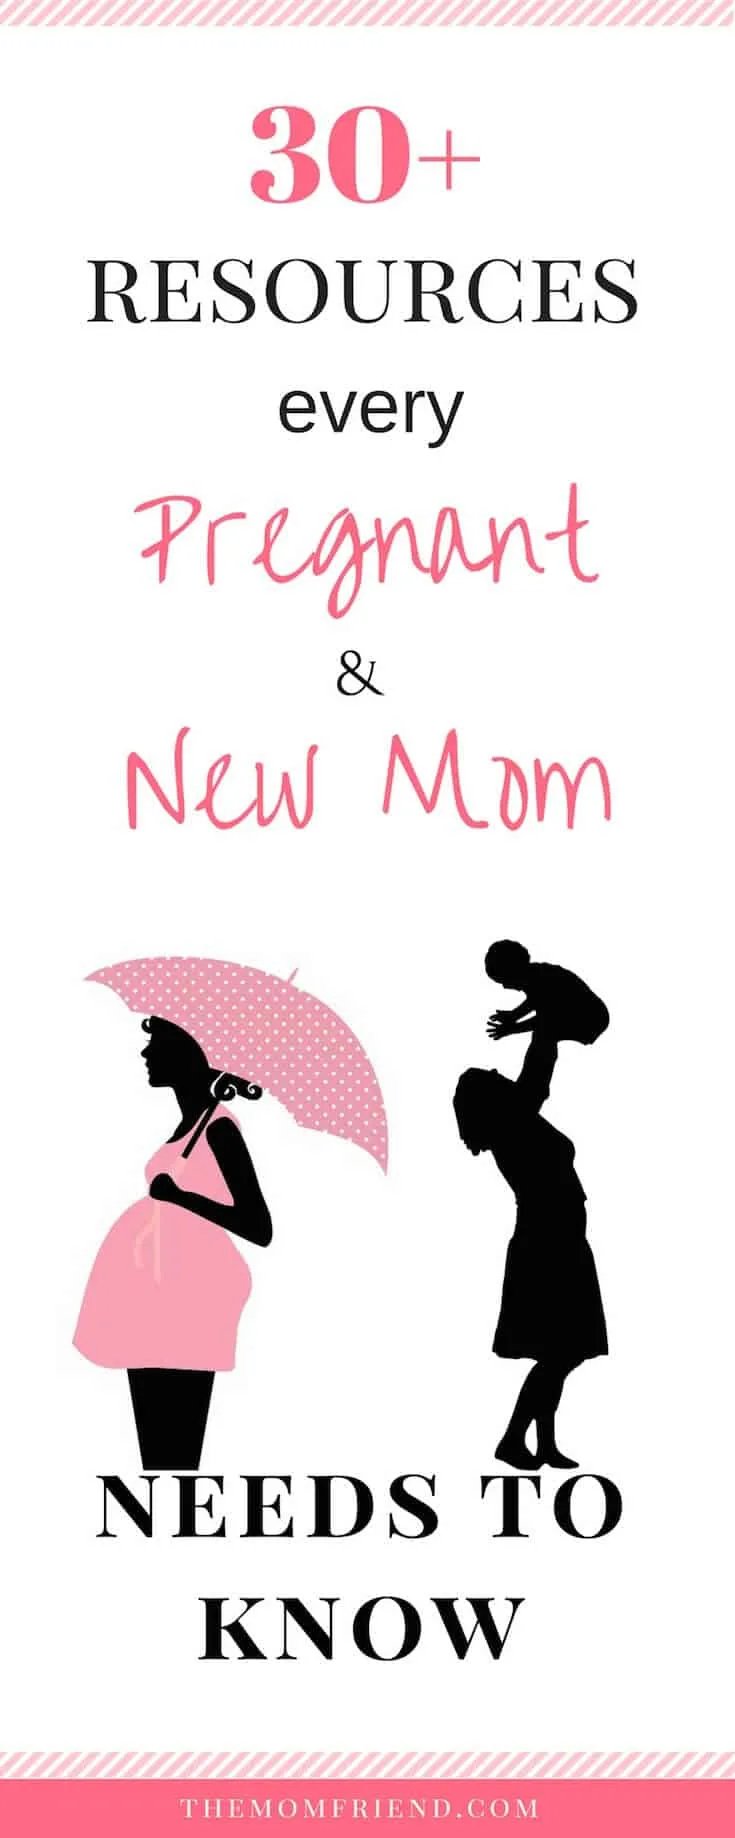 Pinnable image with text for Pregnancy & New Mom Resources.